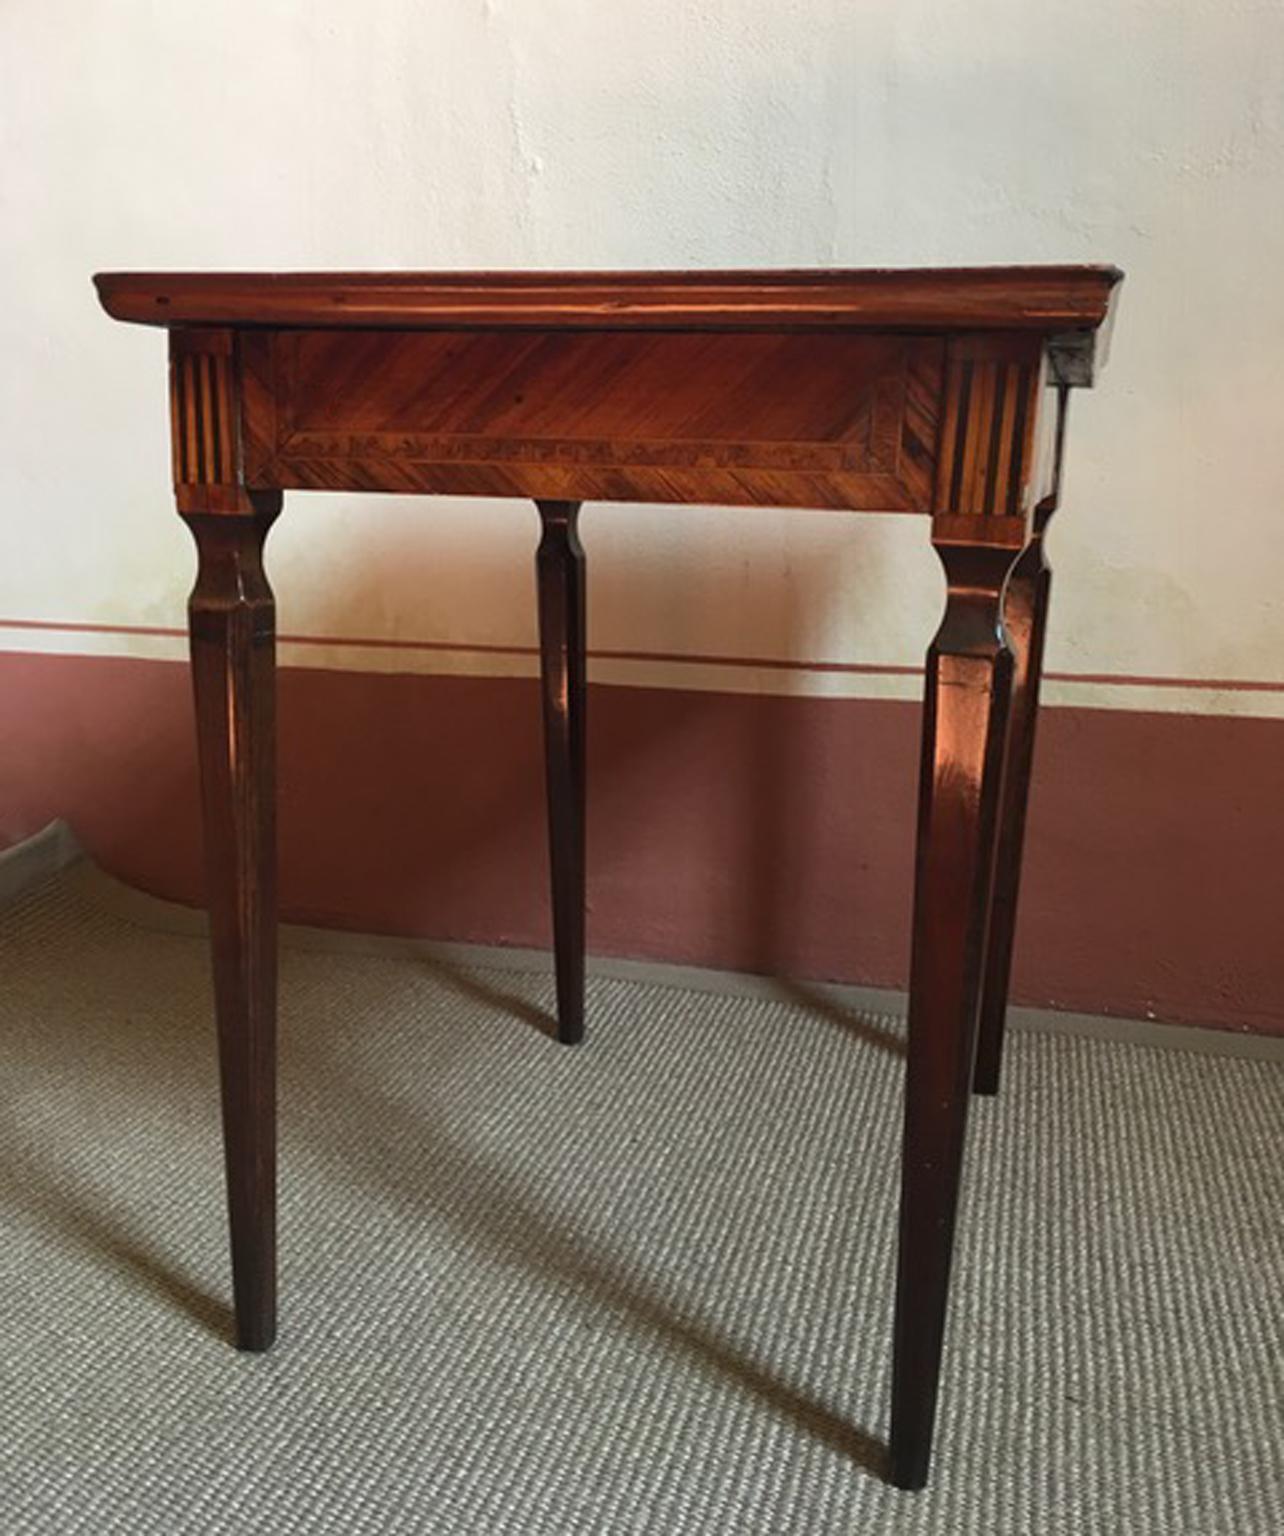 Italy Mid-18th Century Walnut Inlaid Bedside or Side Table with Drawer For Sale 6